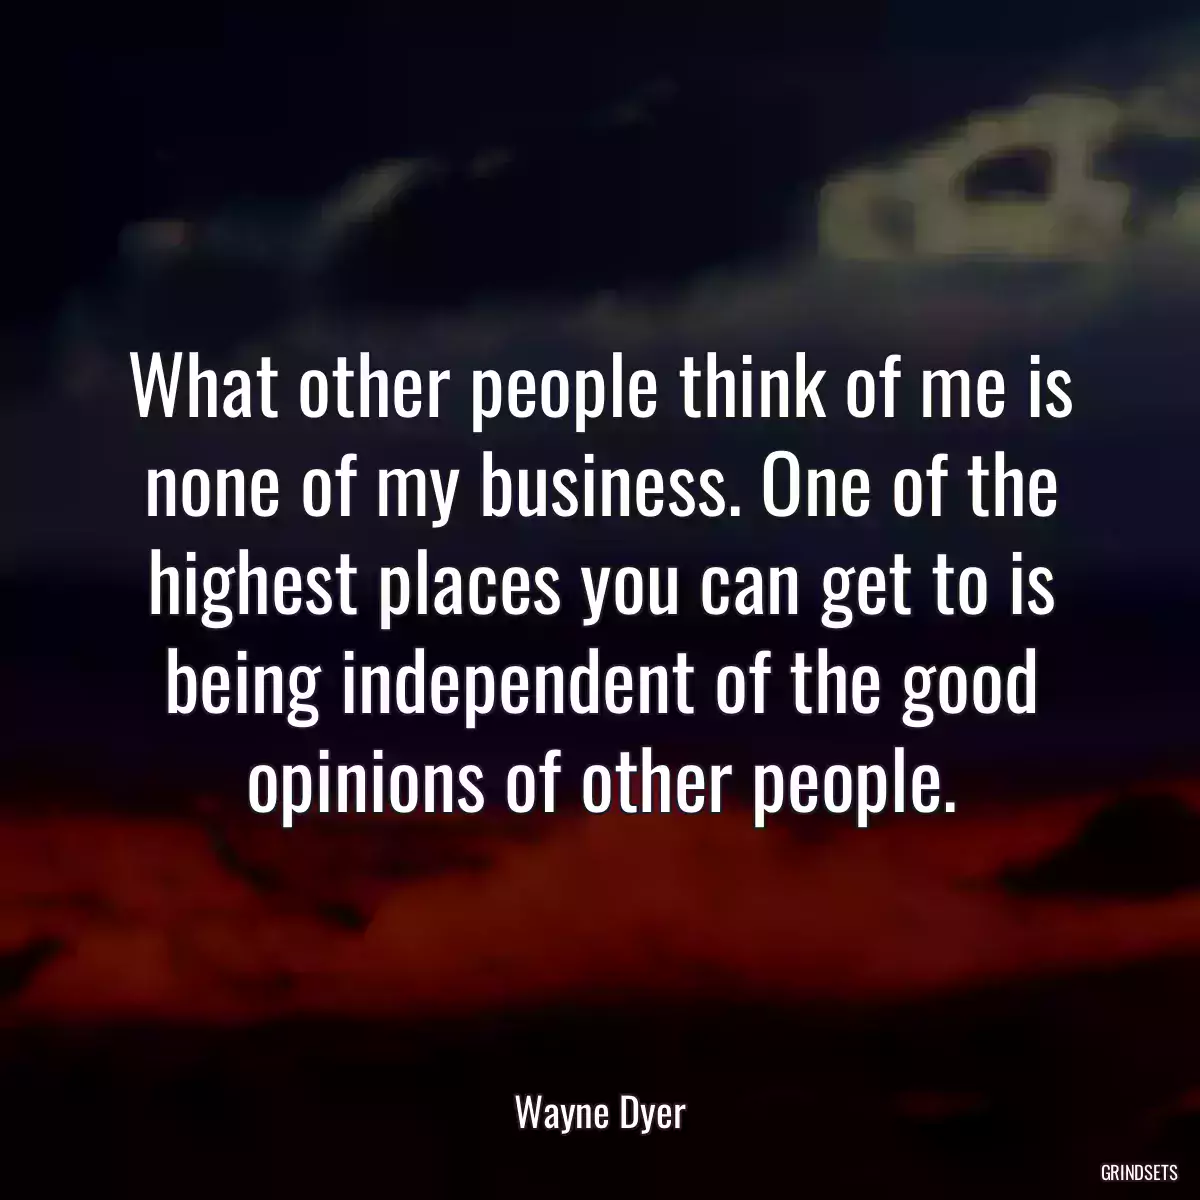 What other people think of me is none of my business. One of the highest places you can get to is being independent of the good opinions of other people.